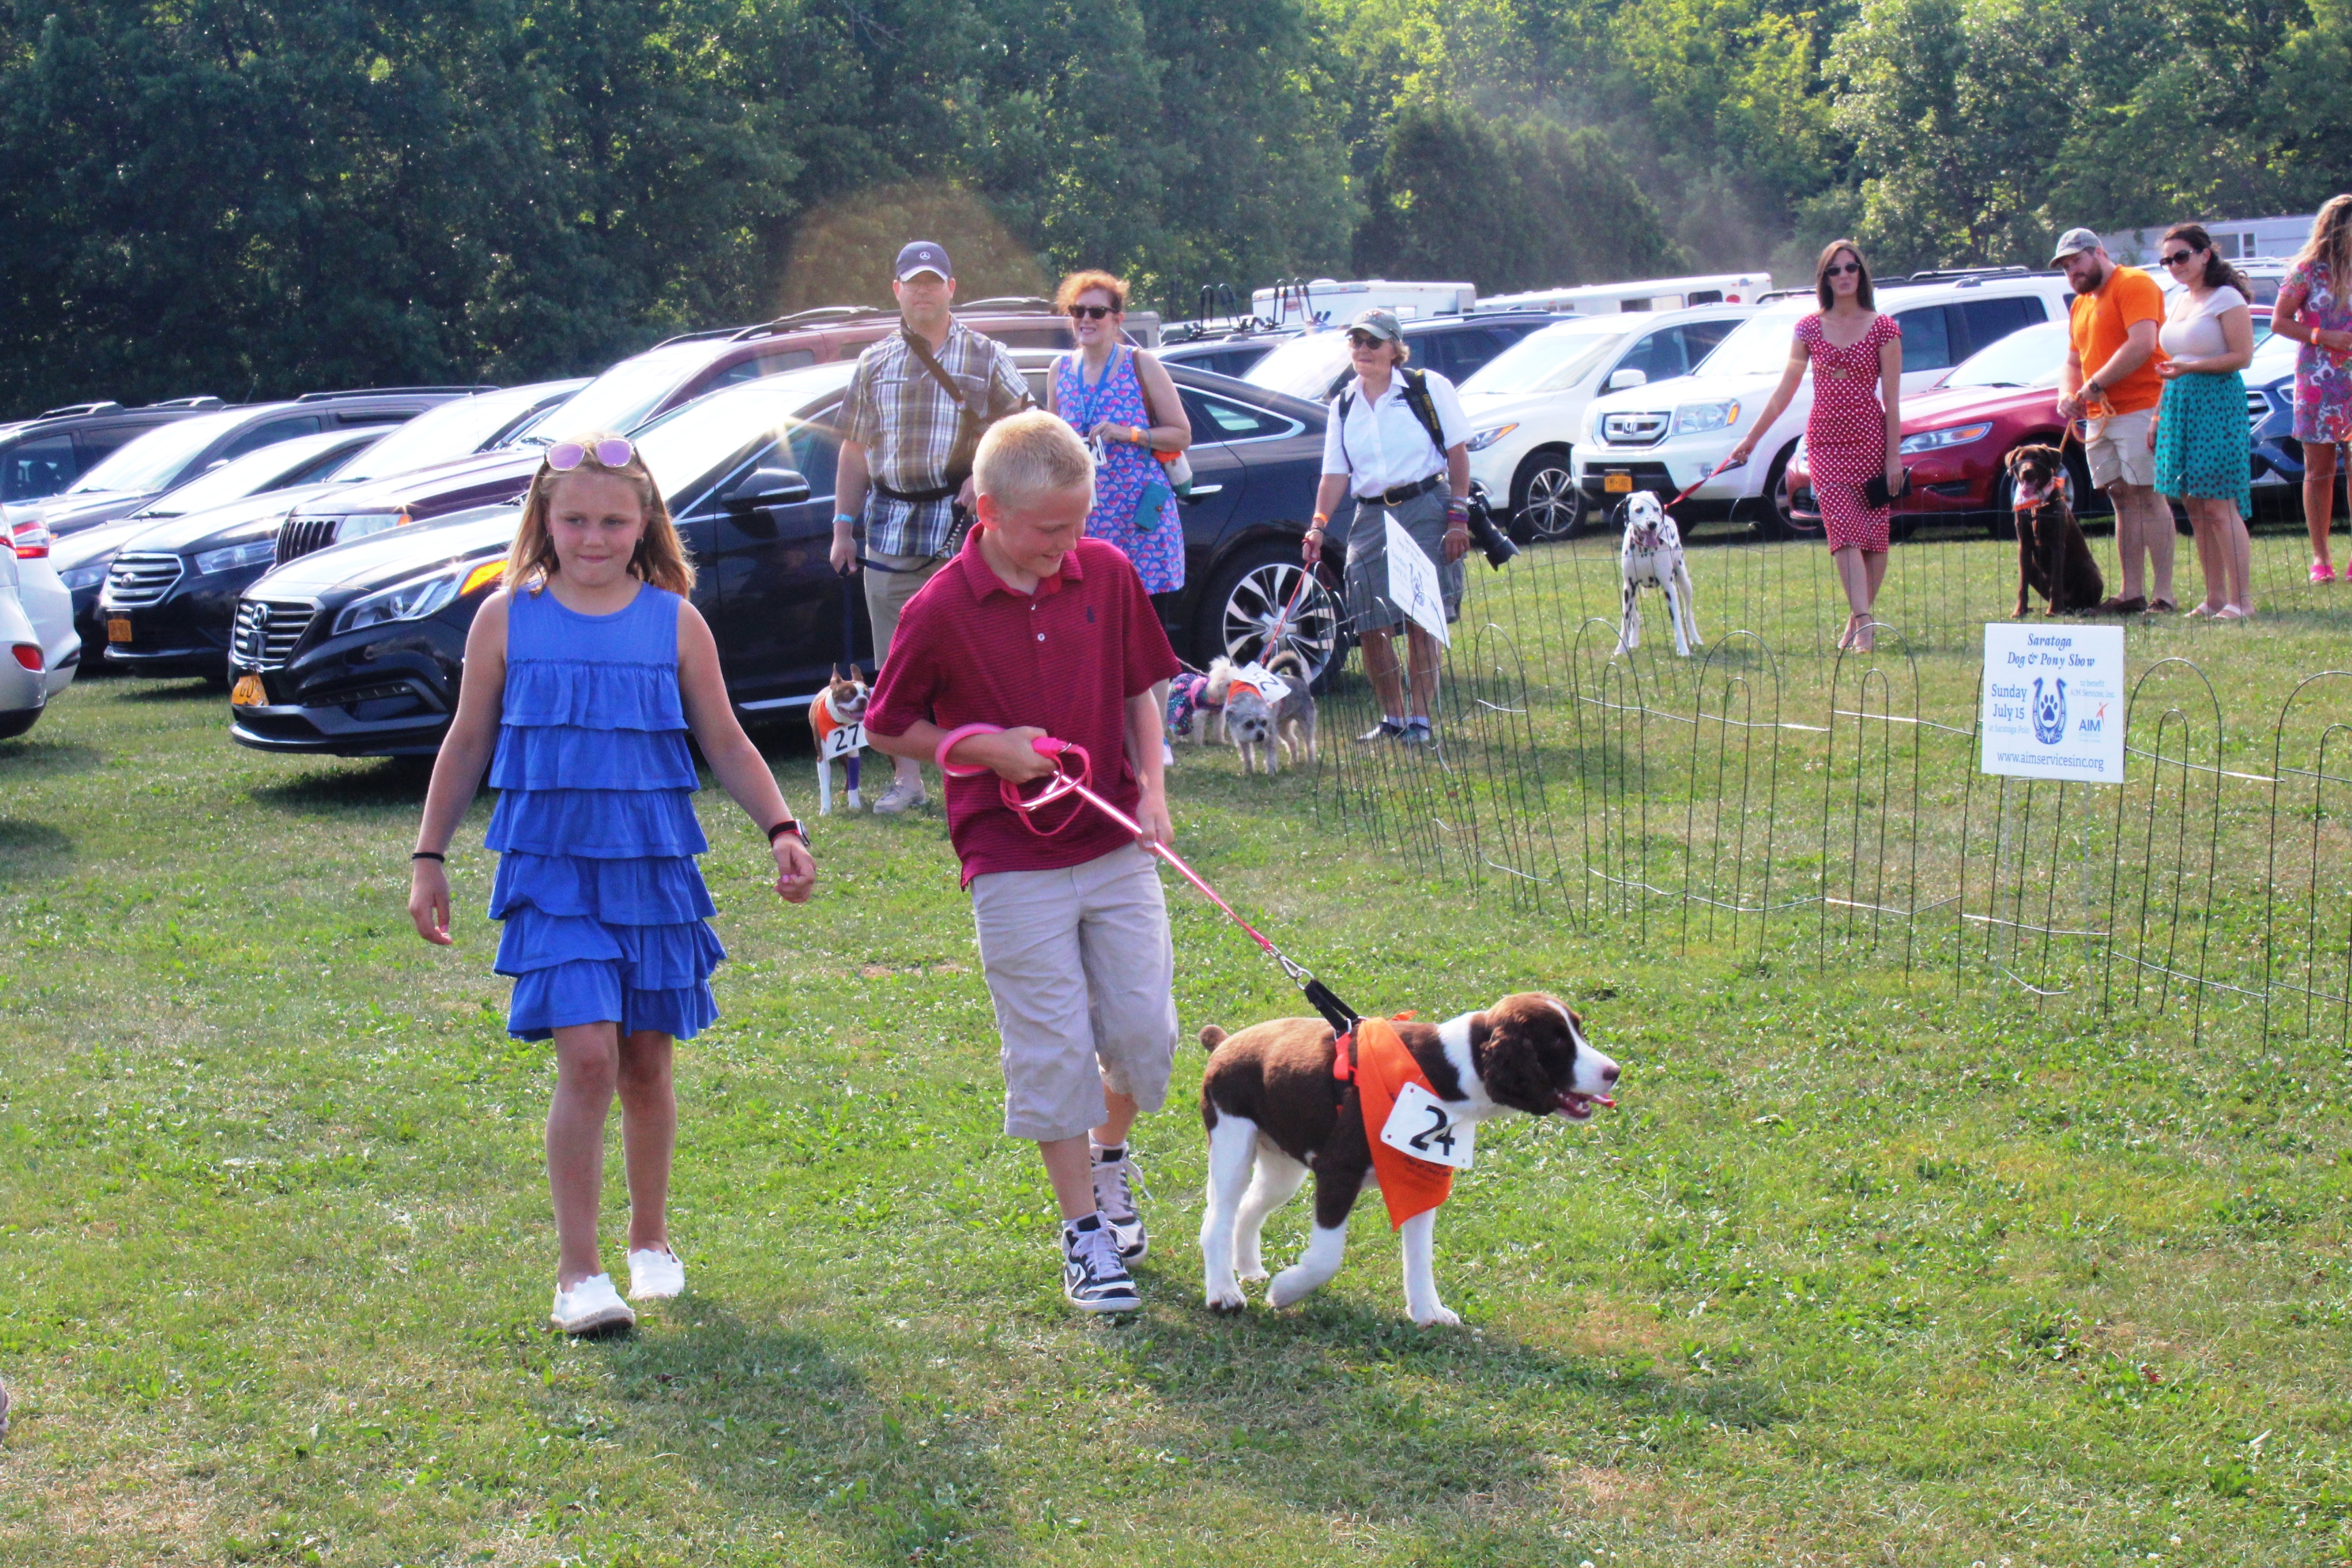 Two kids walking dog at the Saratoga Dog & Pony Show to benefit AIM Services, Inc.